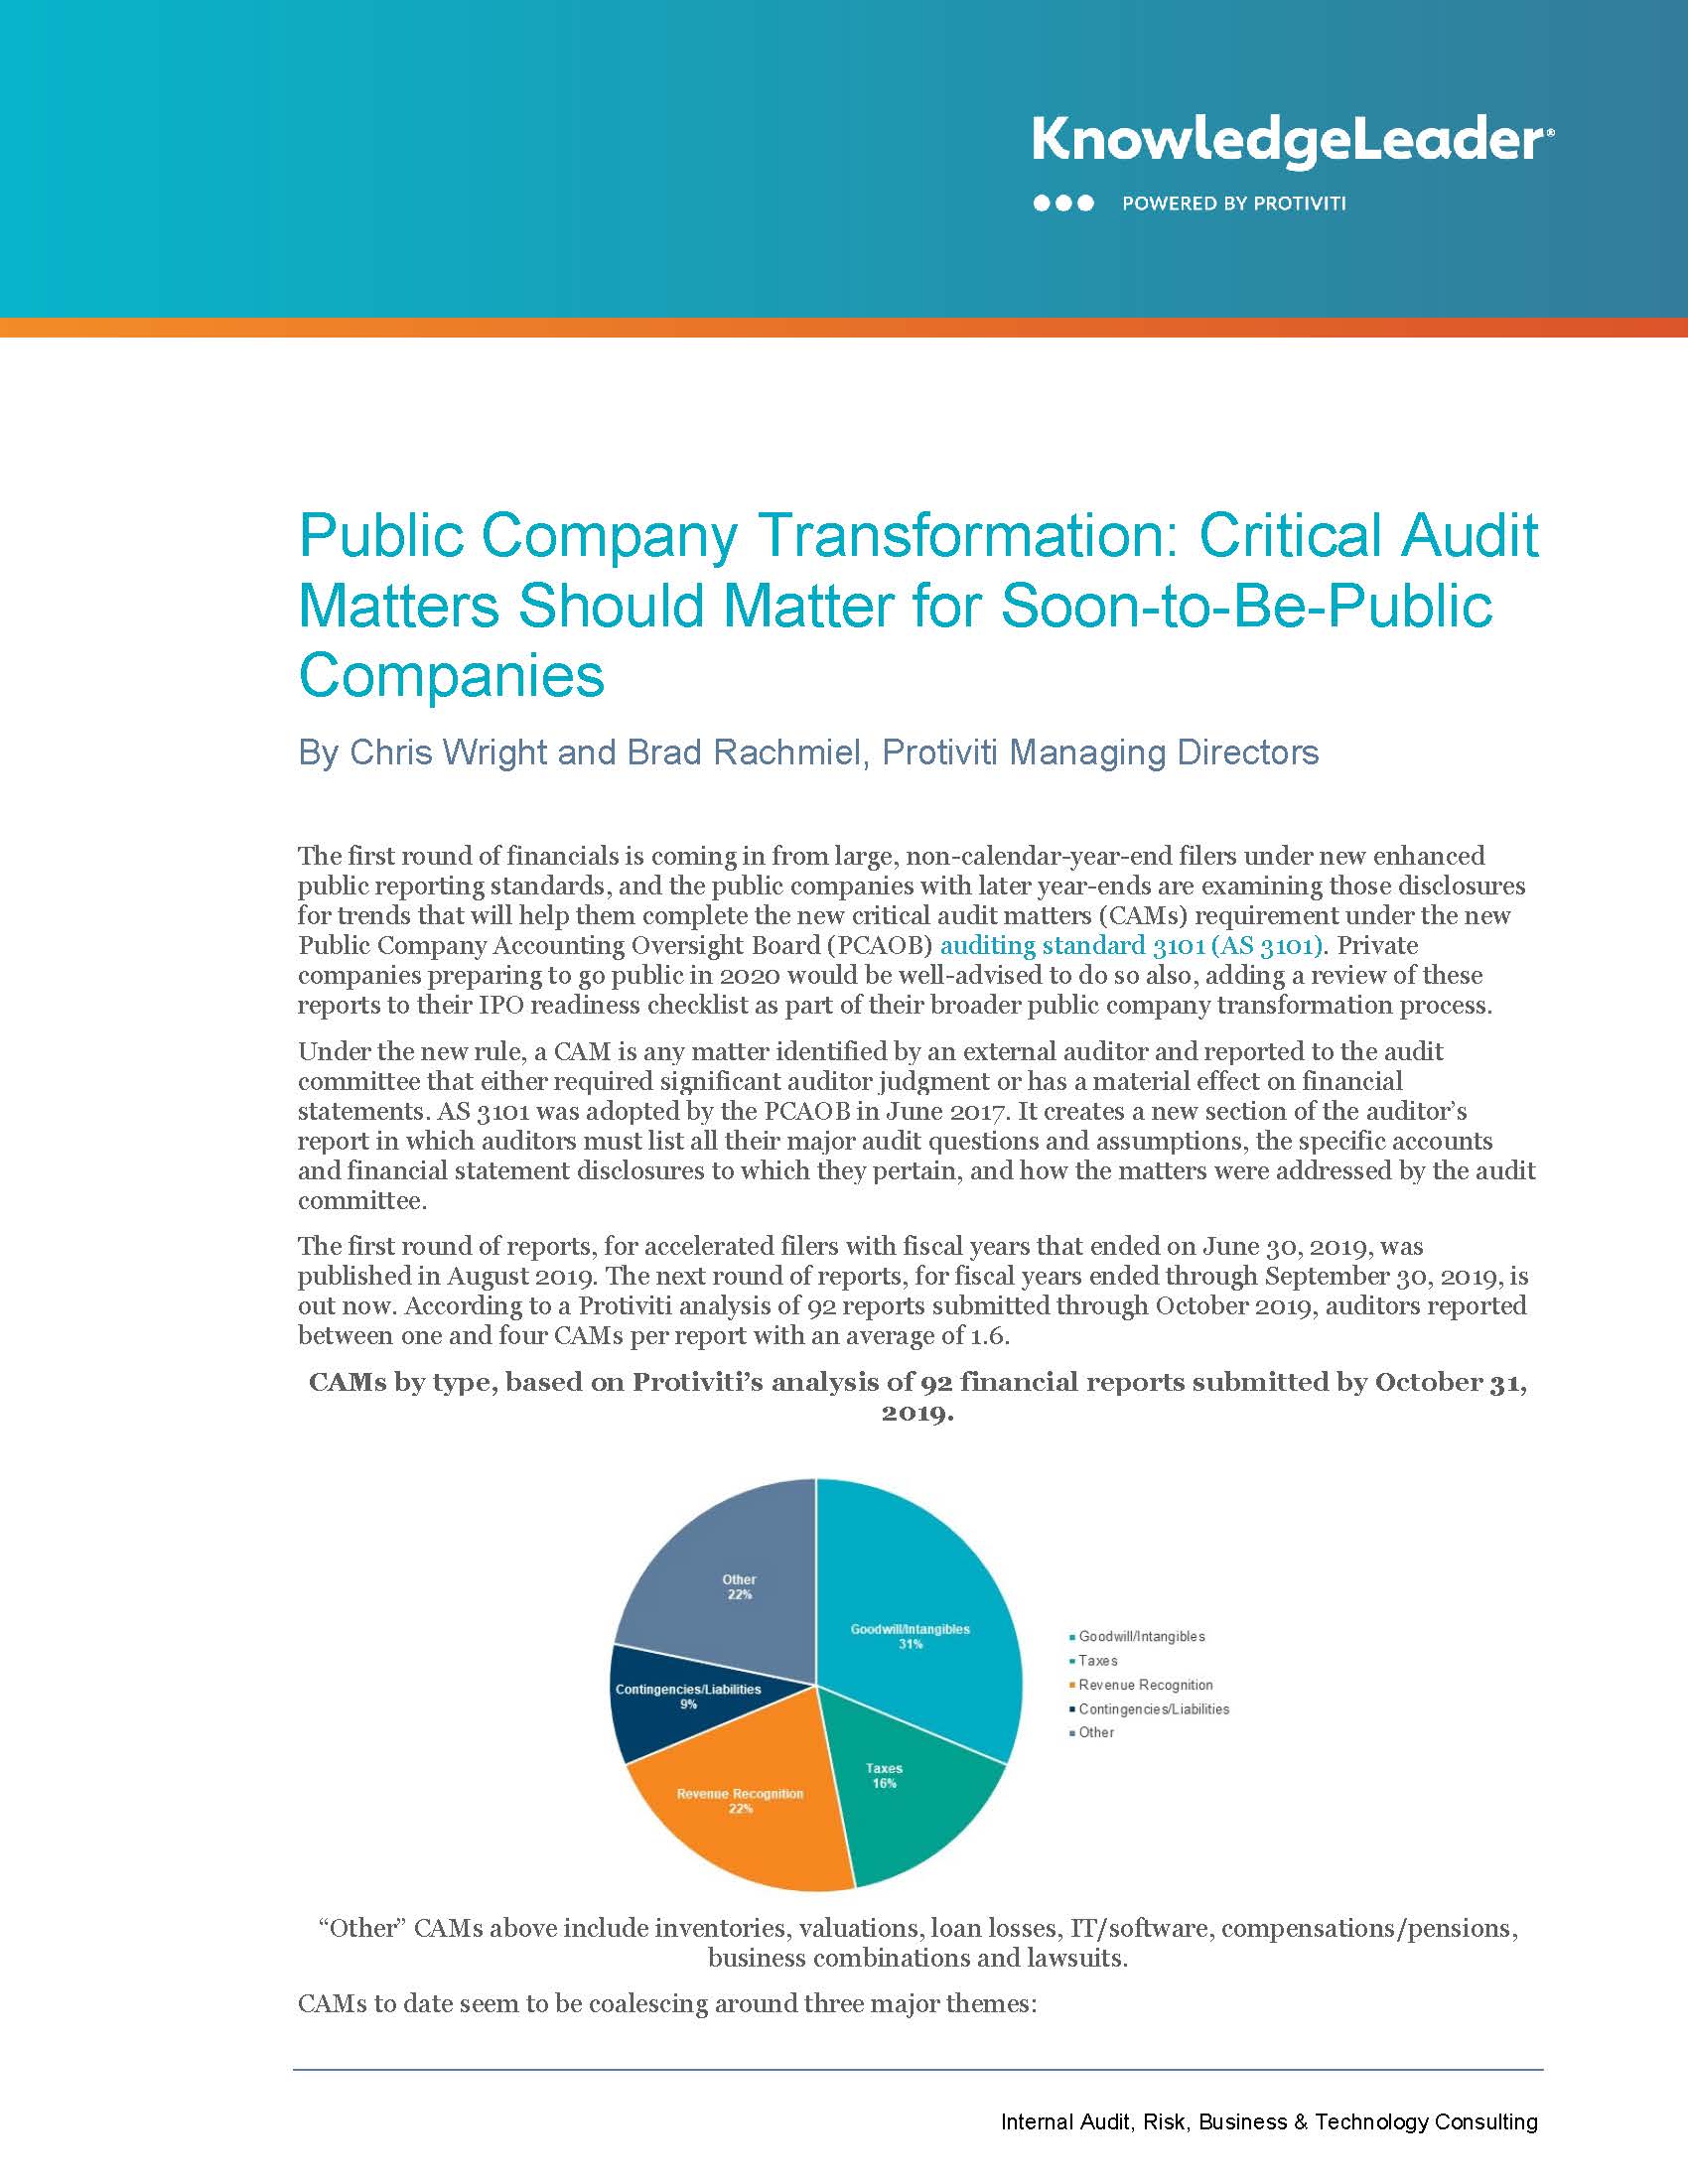 Screenshot of the first page of Public Company Transformation Critical Audit Matters Should Matter for Soon-to-Be-Public Companies